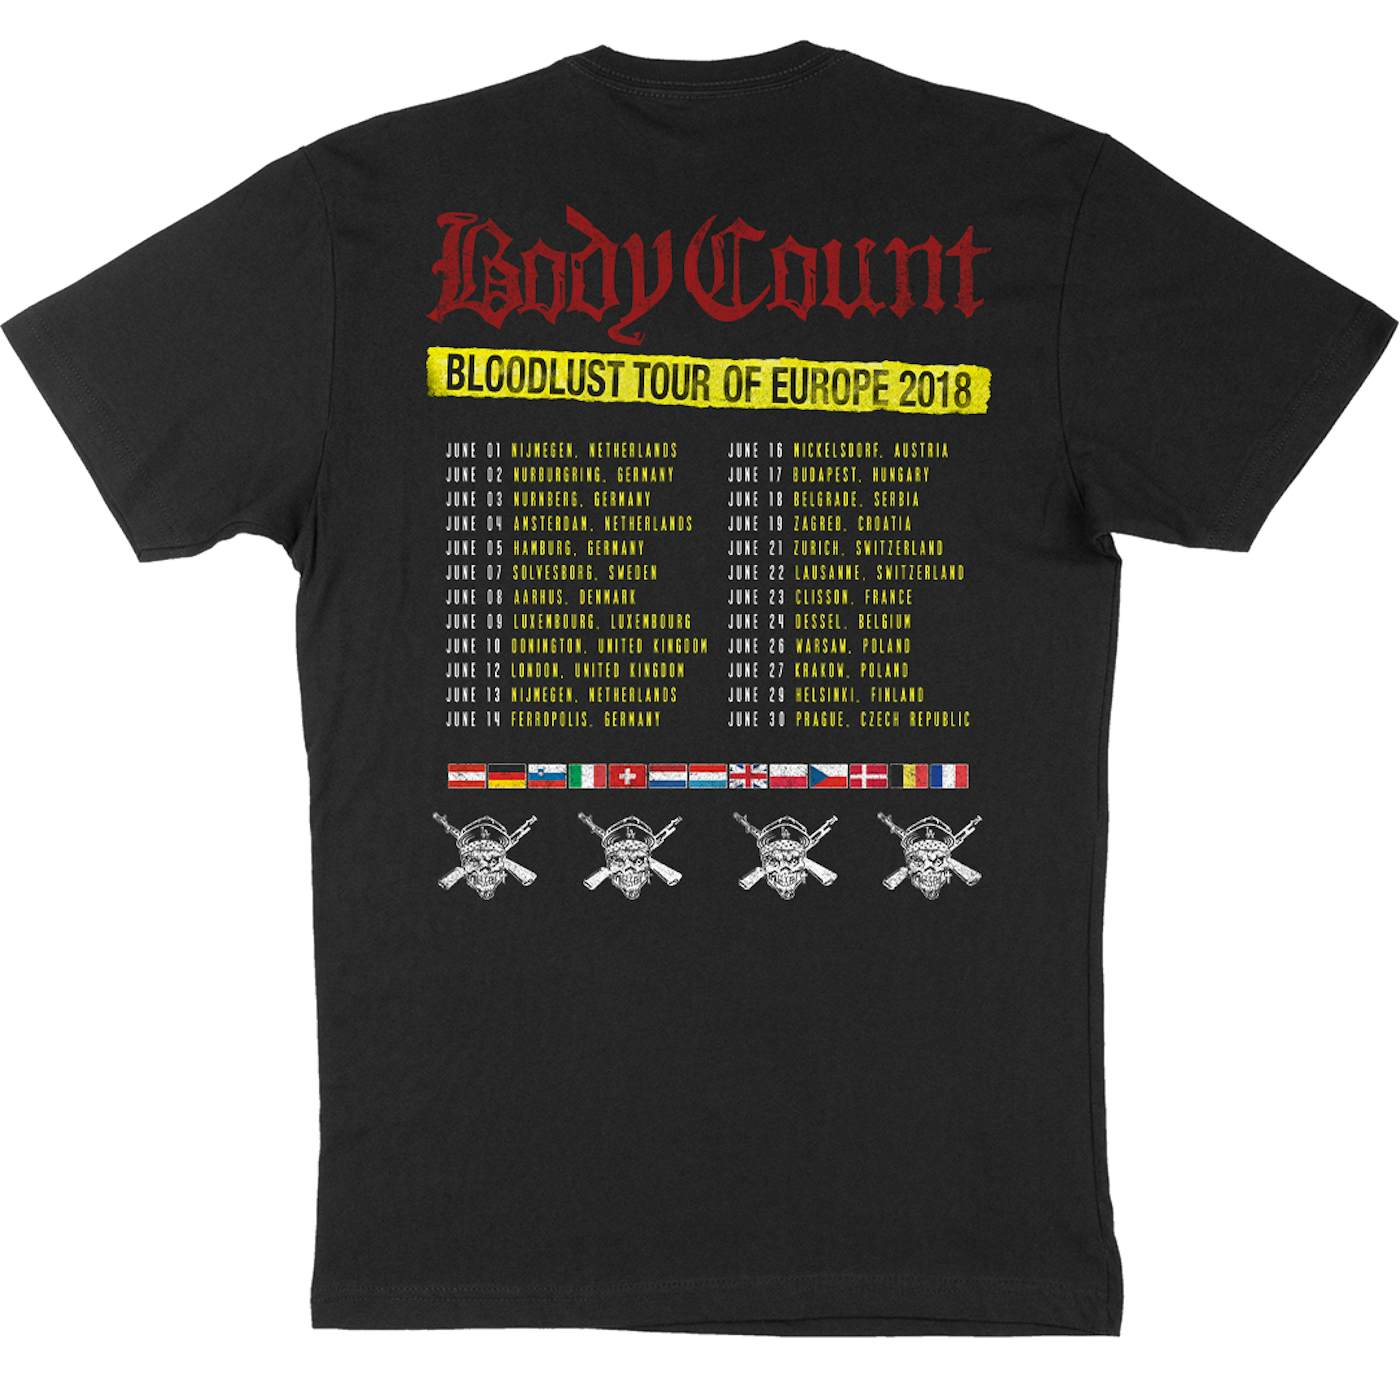 Body Count "Attack" T-Shirt